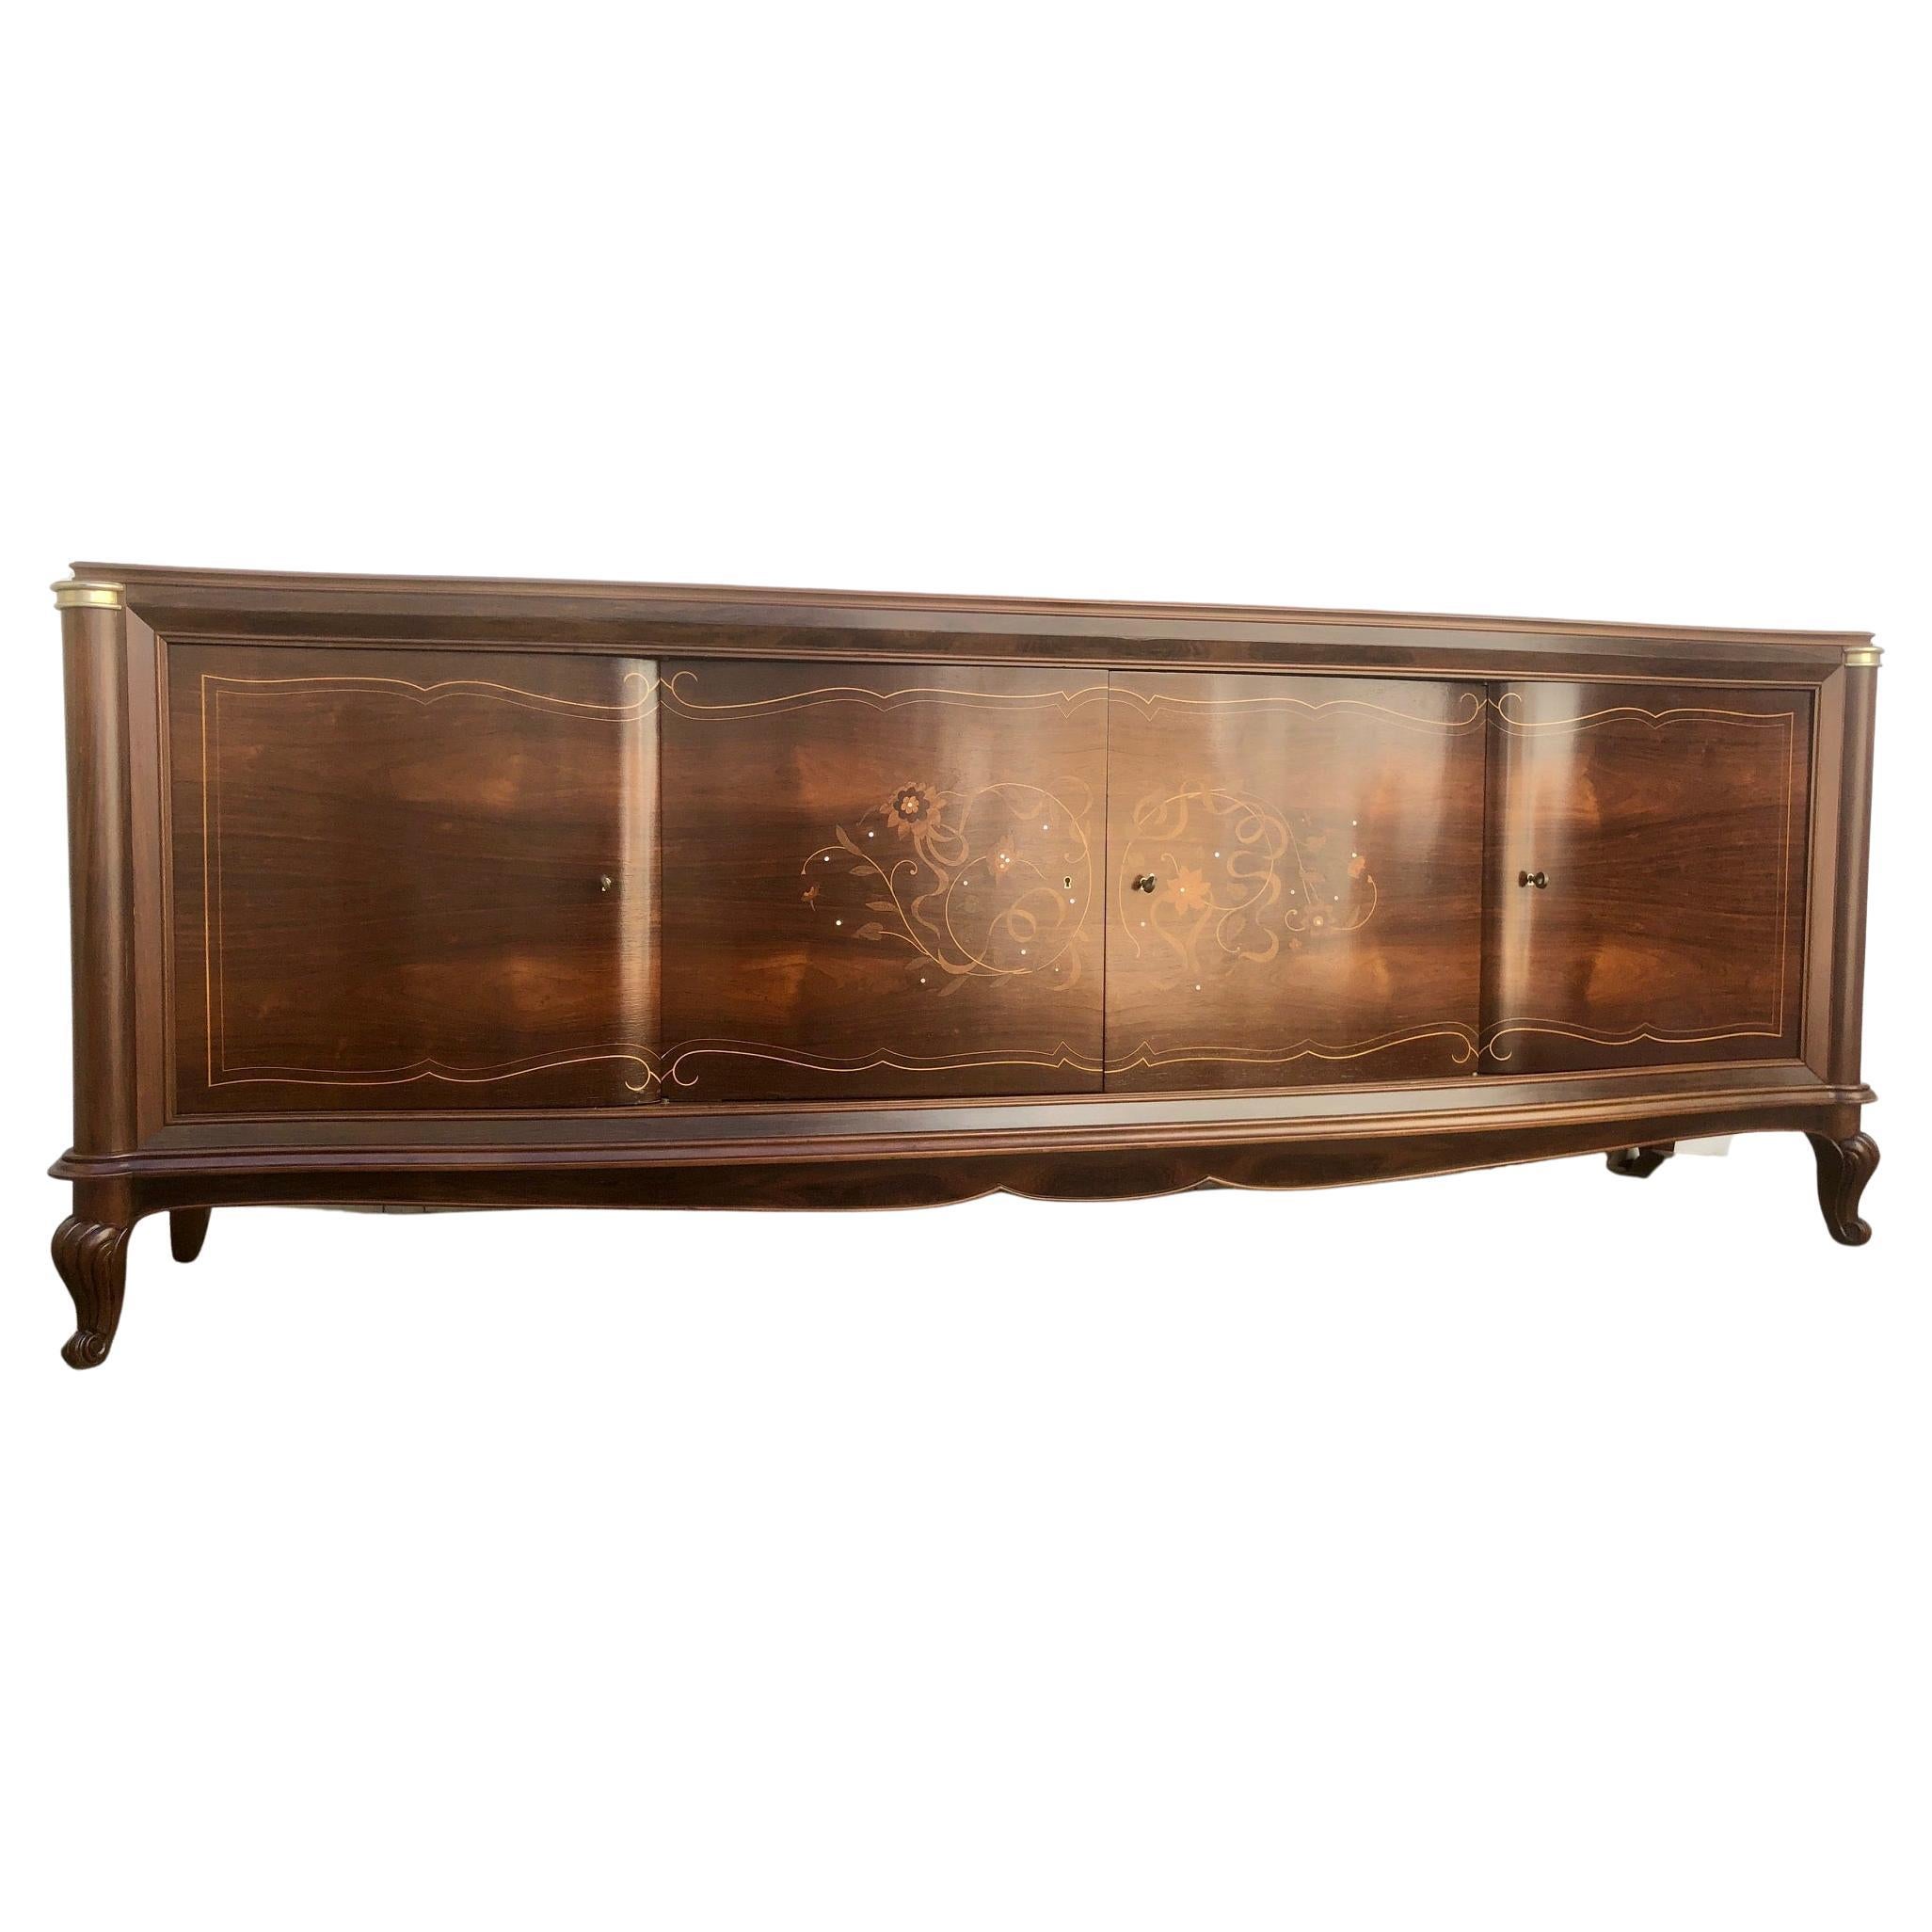 20th Century French Rosewood Sideboard in Art Deco Style For Sale